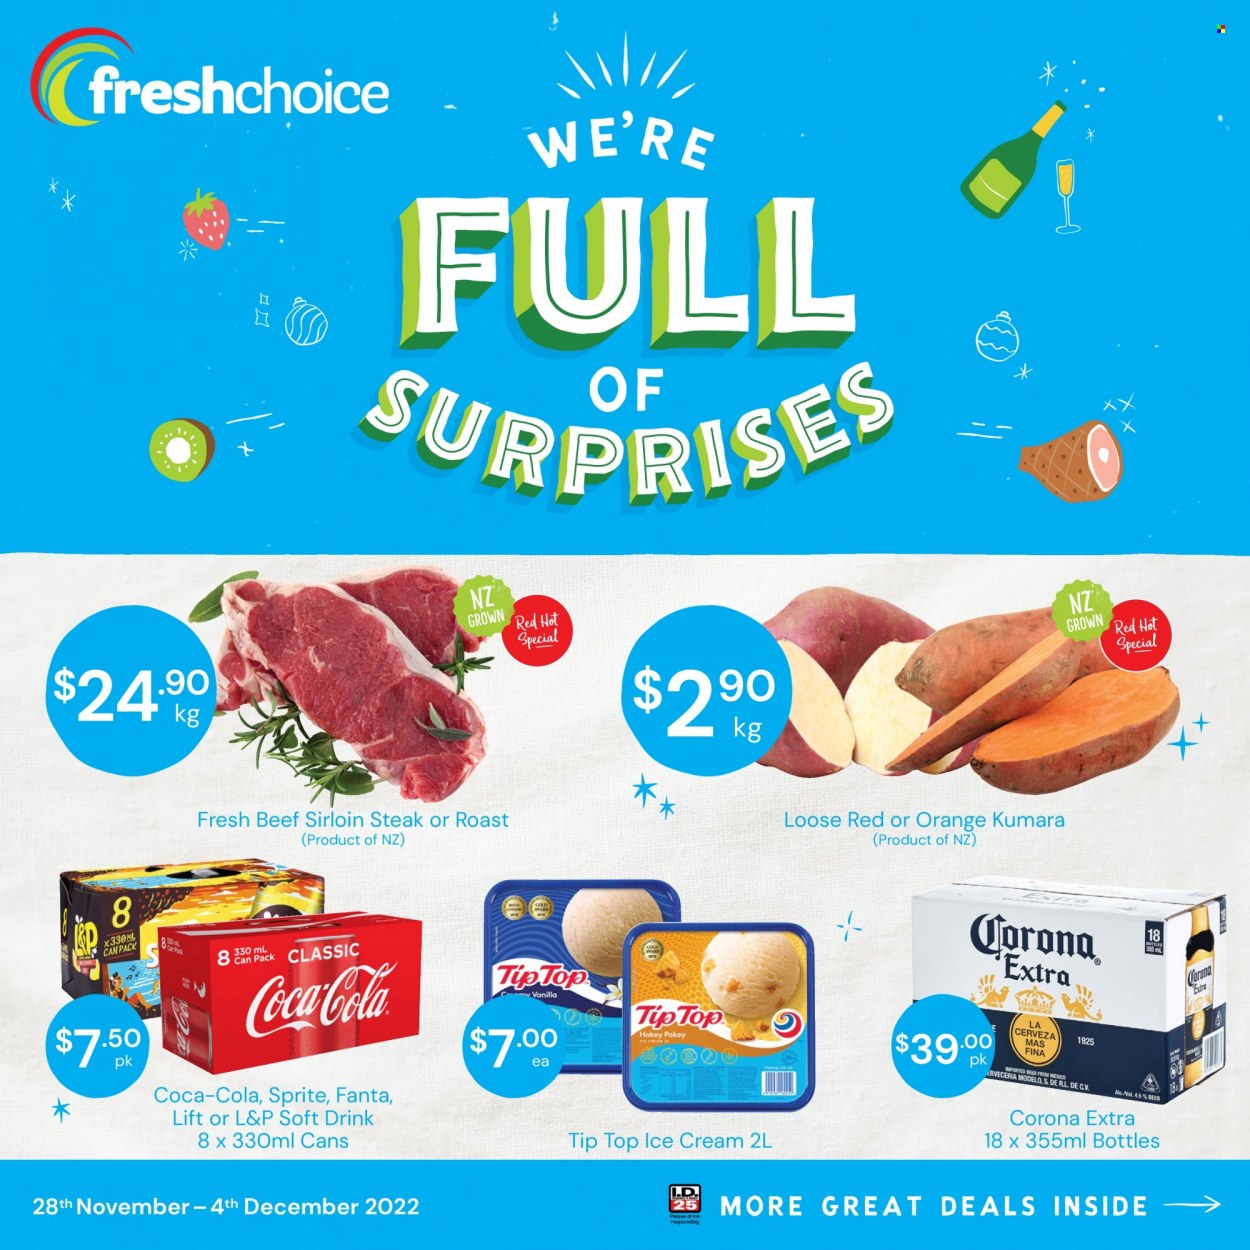 thumbnail - Fresh Choice mailer - 28.11.2022 - 04.12.2022 - Sales products - Tip Top, oranges, ice cream, Coca-Cola, Sprite, Fanta, soft drink, L&P, beer, Corona Extra, Modelo, beef meat, beef sirloin, steak, sirloin steak. Page 1.